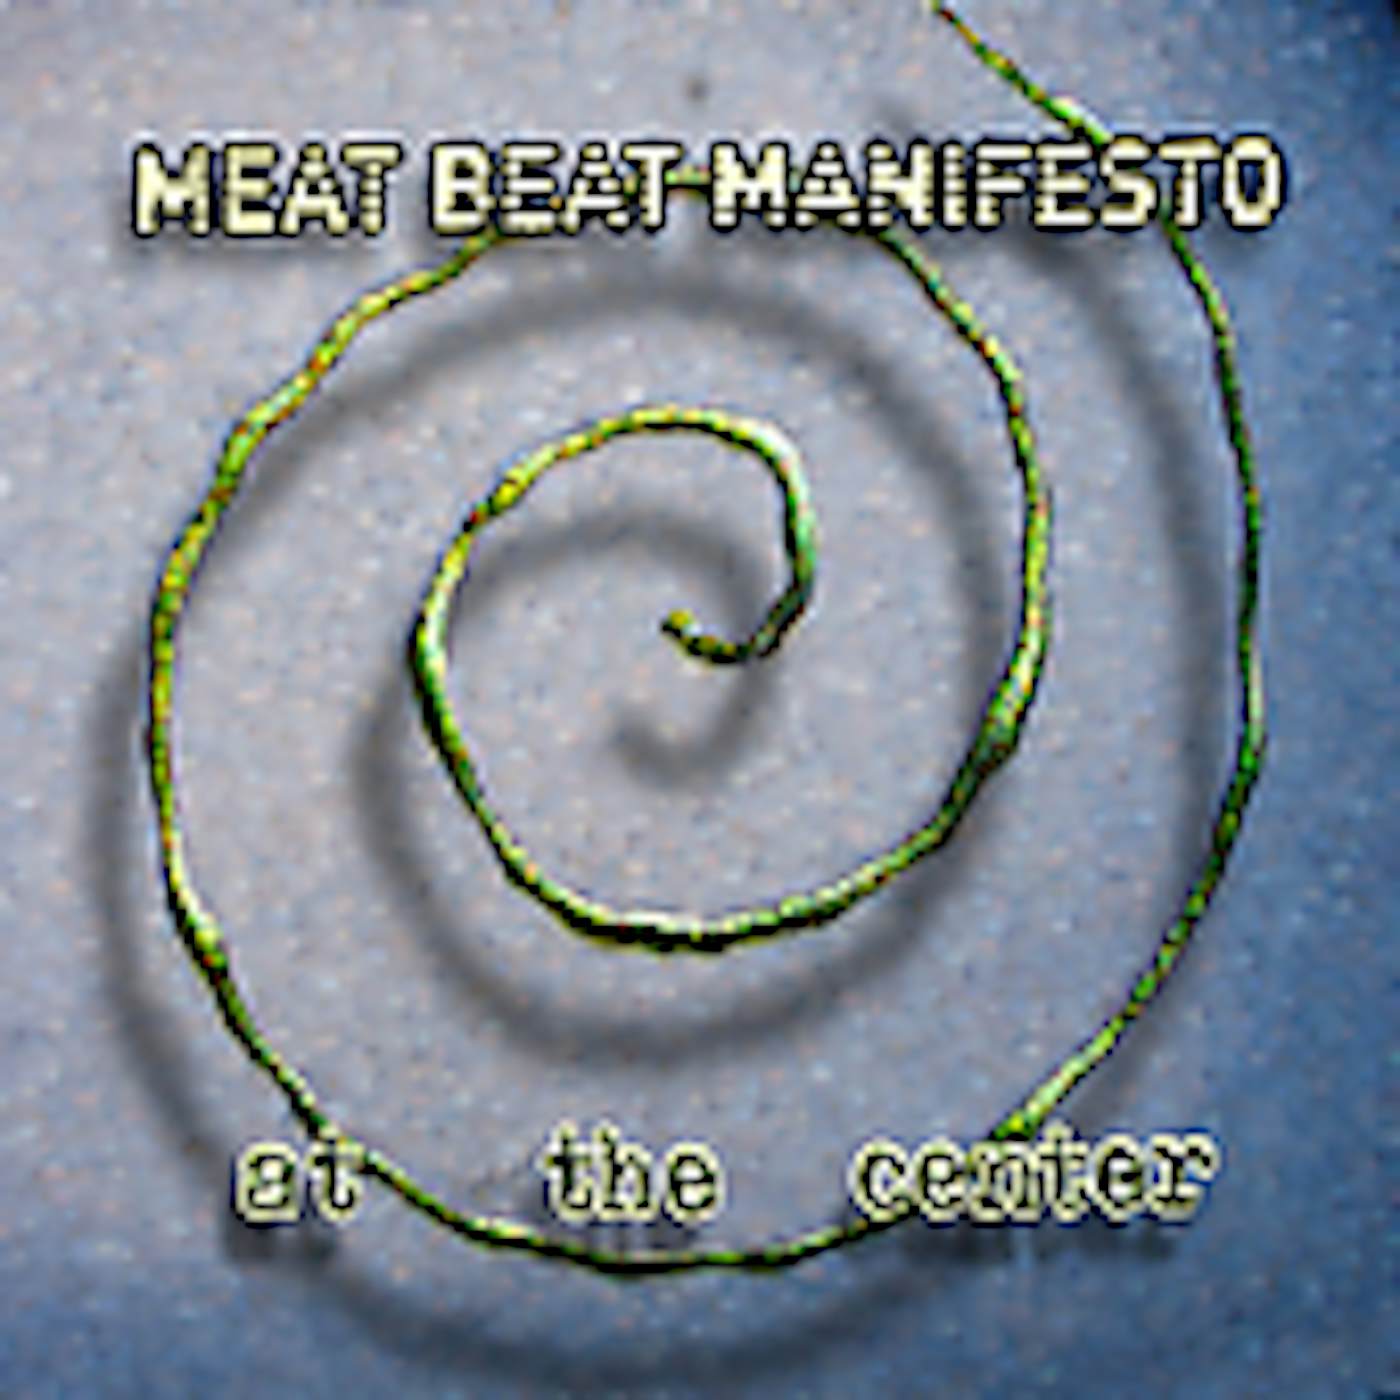 Meat Beat Manifesto AT THE CENTER CD